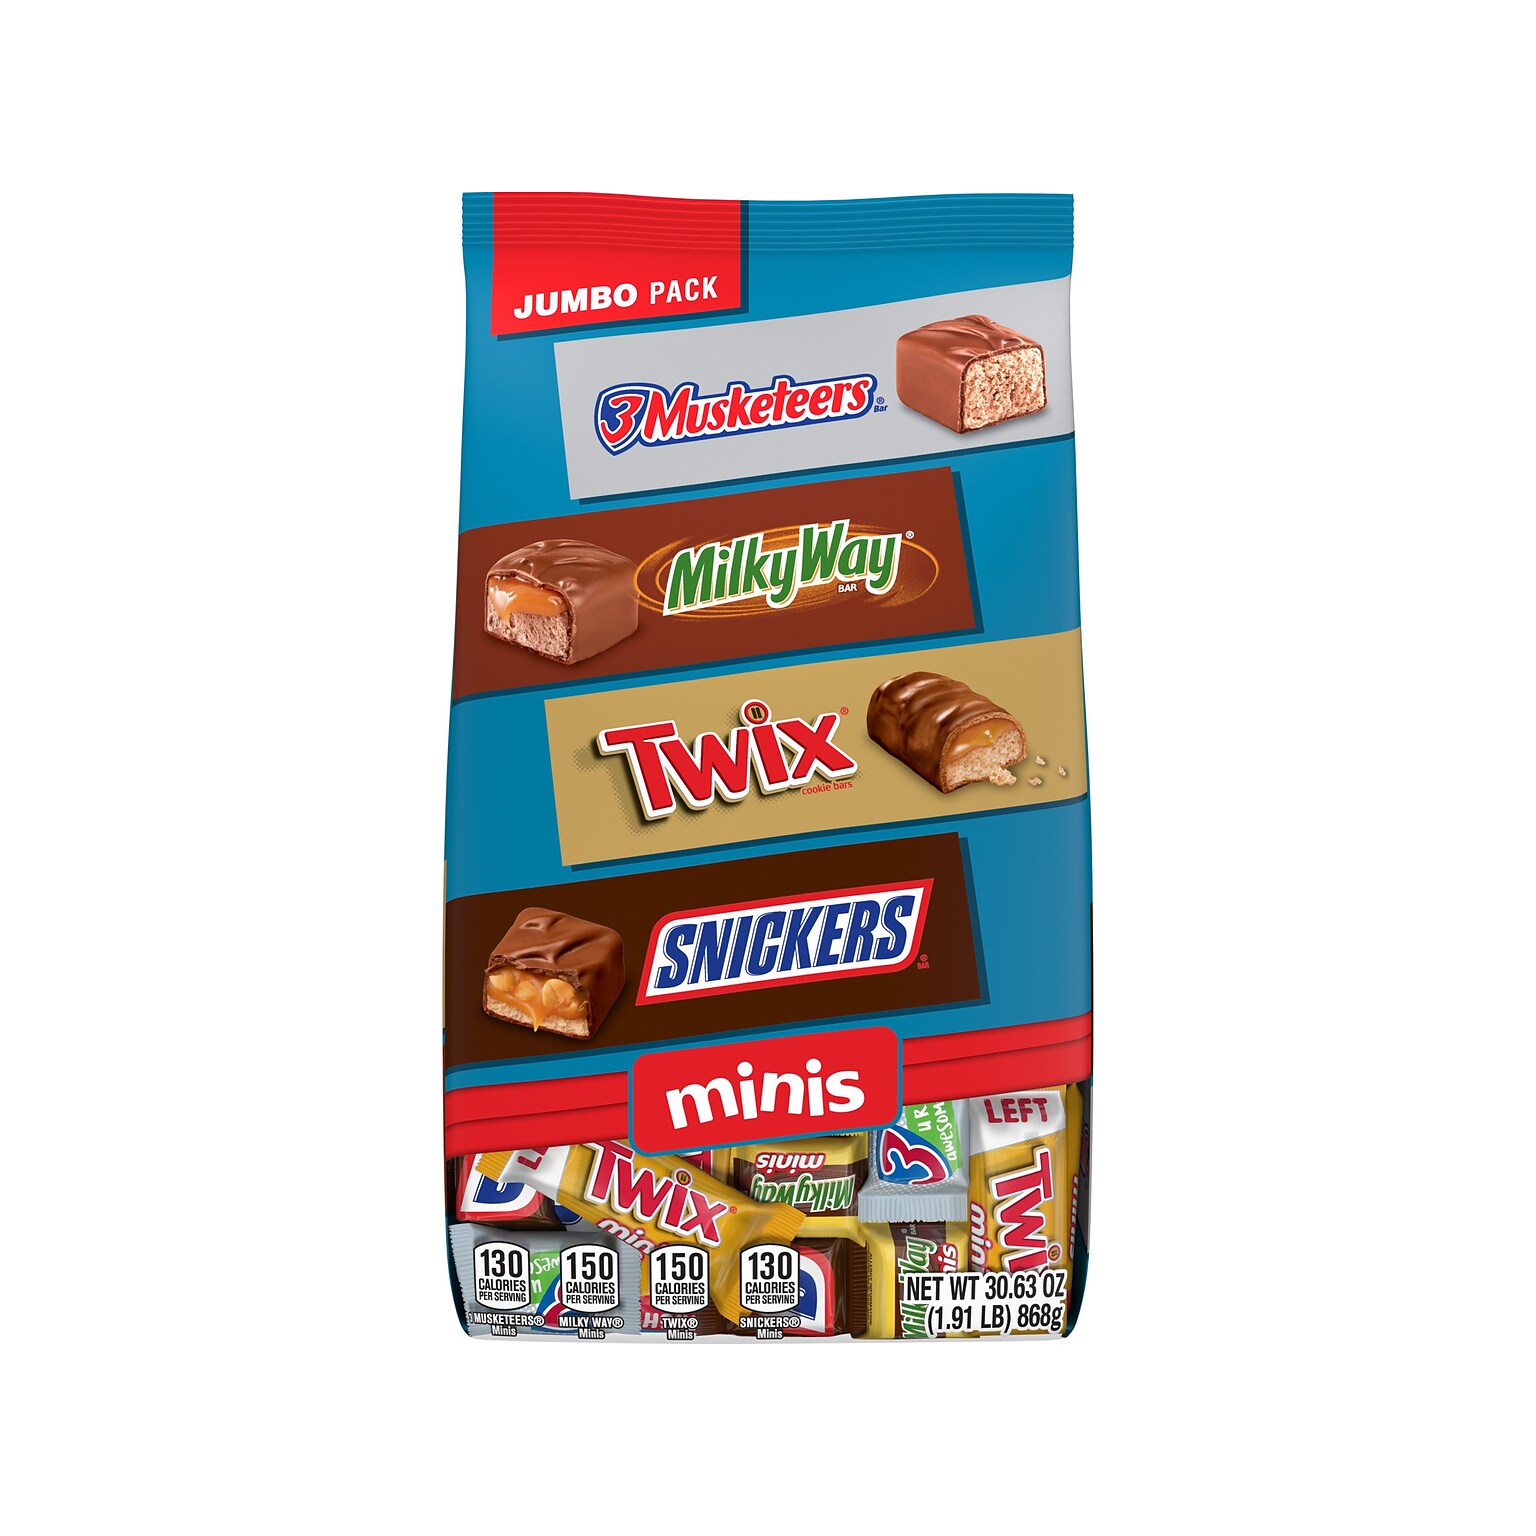 Snickers, Twix, 3Musketeers and MilkyWay Minis Milk Chocolate Candy Bars Bulk Variety Pack, 30.63 oz. (460690)